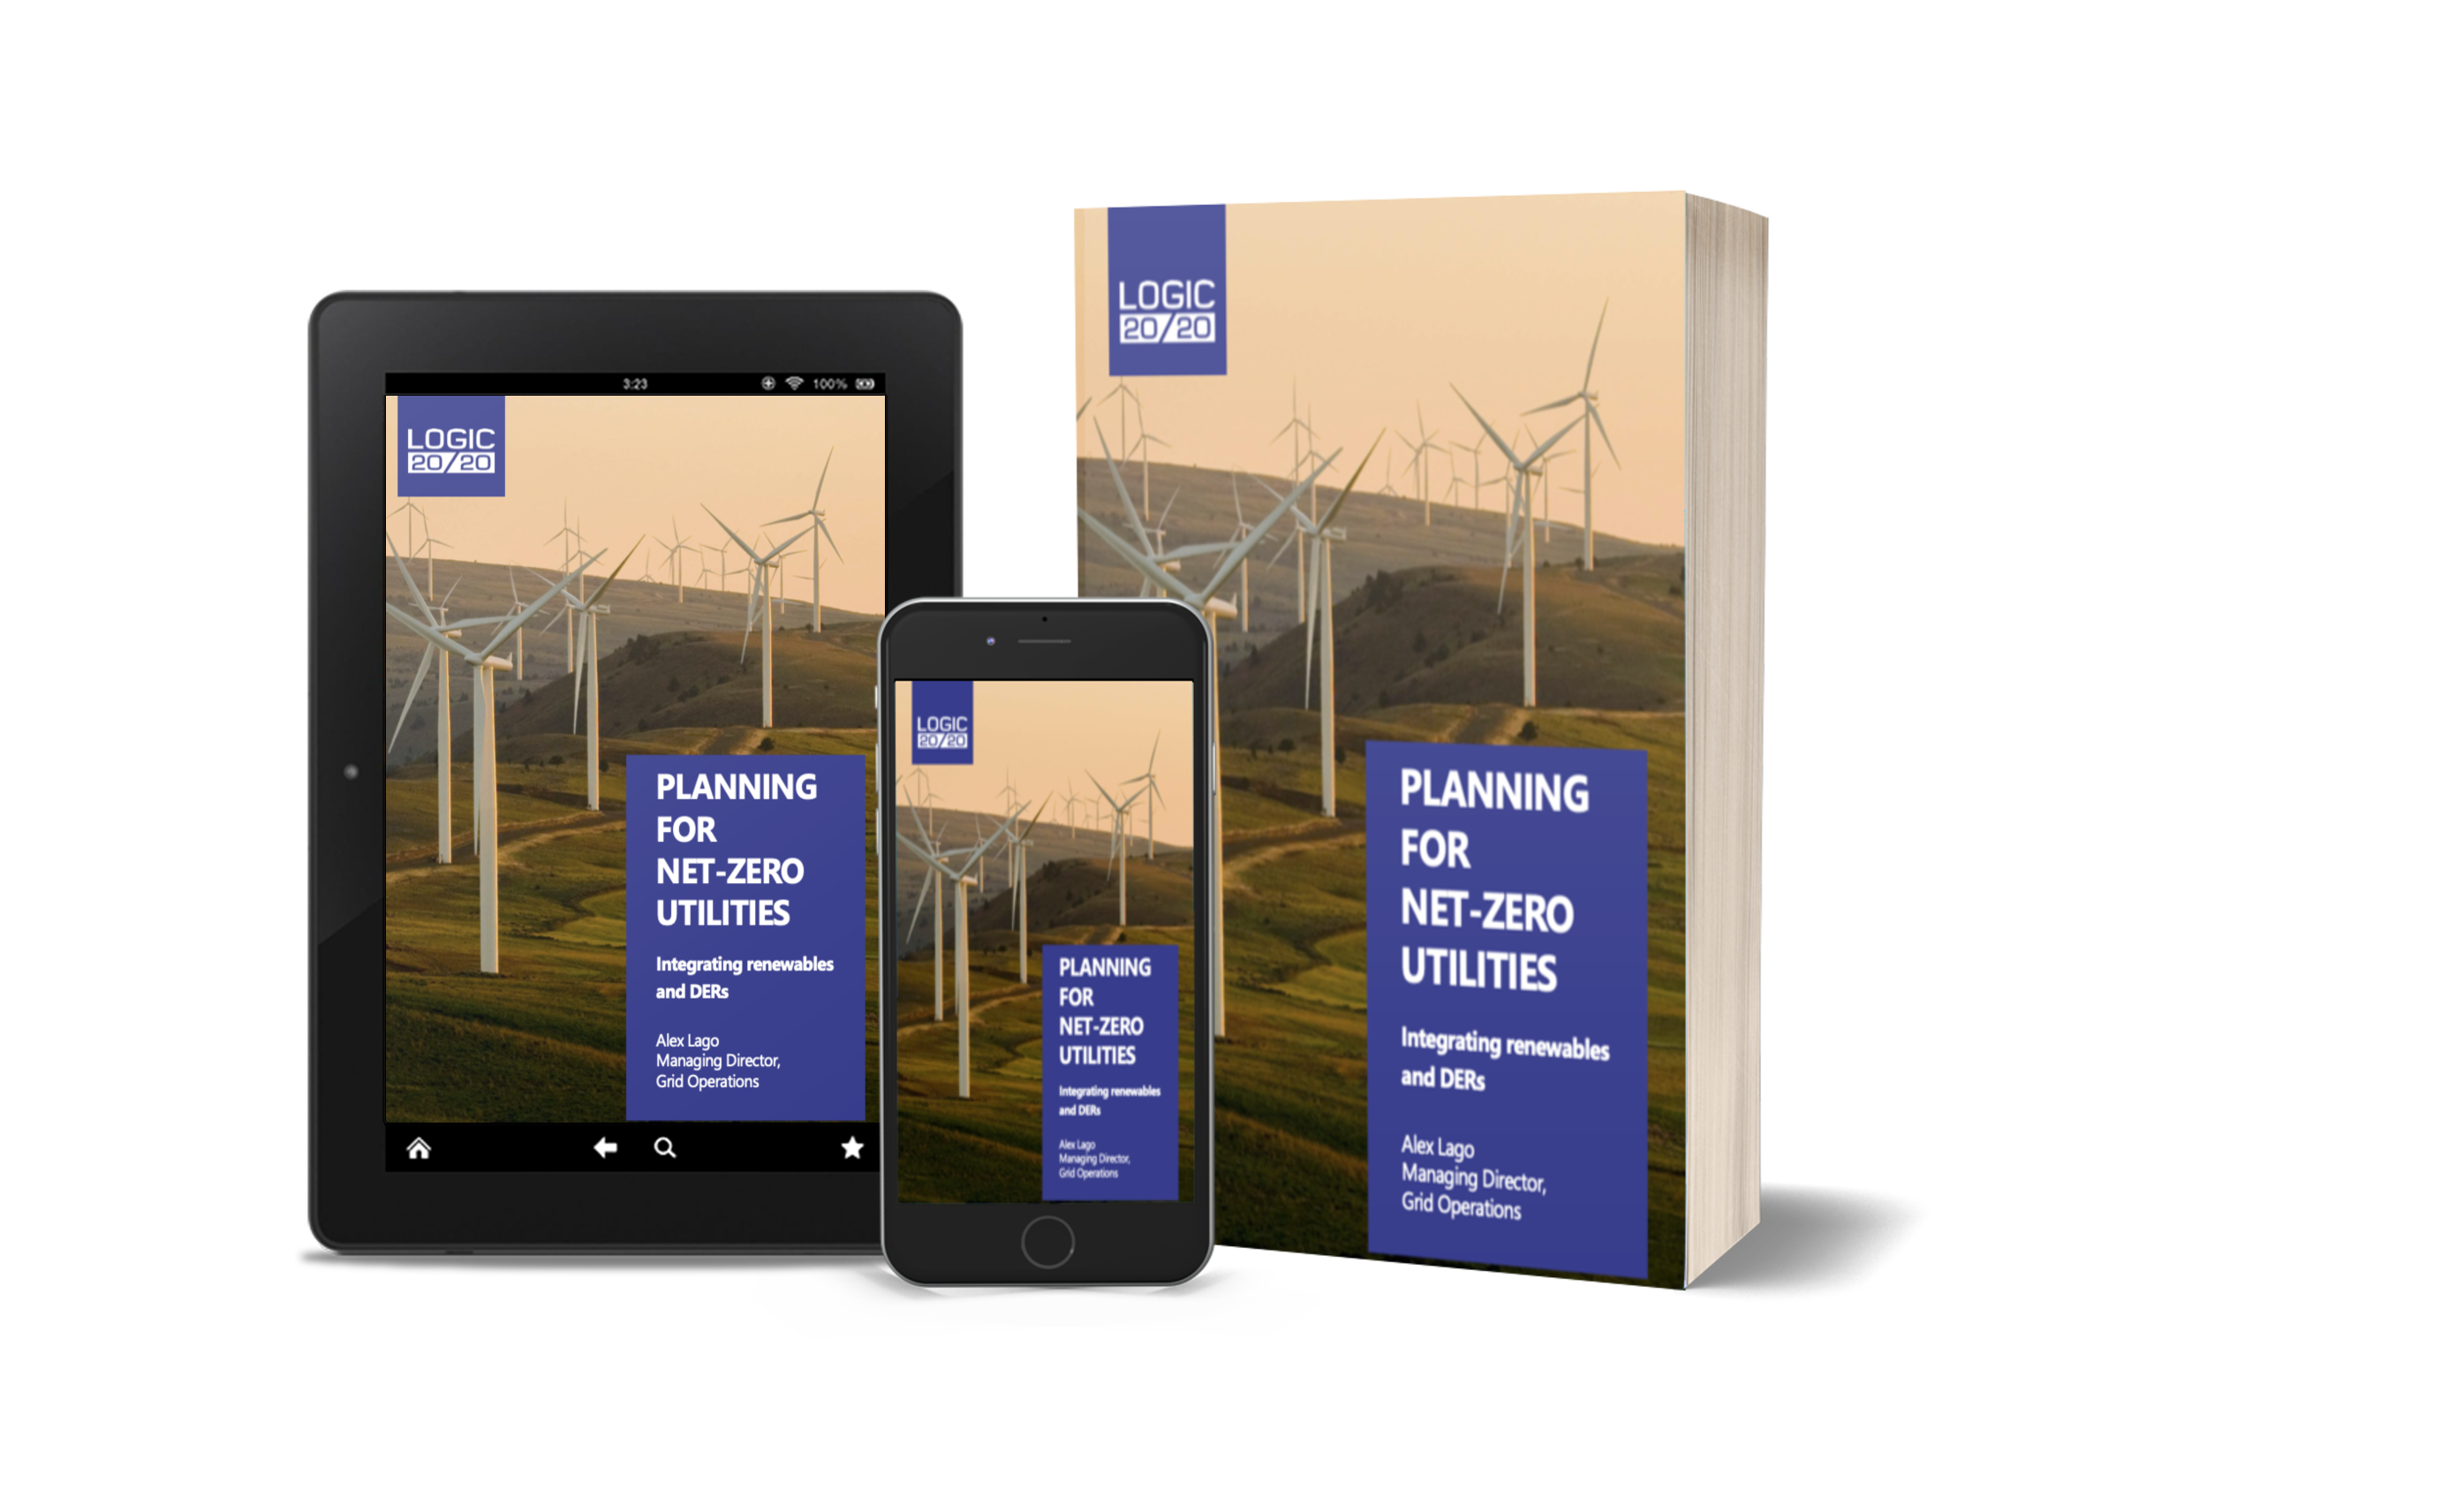 Planning for net zero white paper in tablet, smartphone, and book format